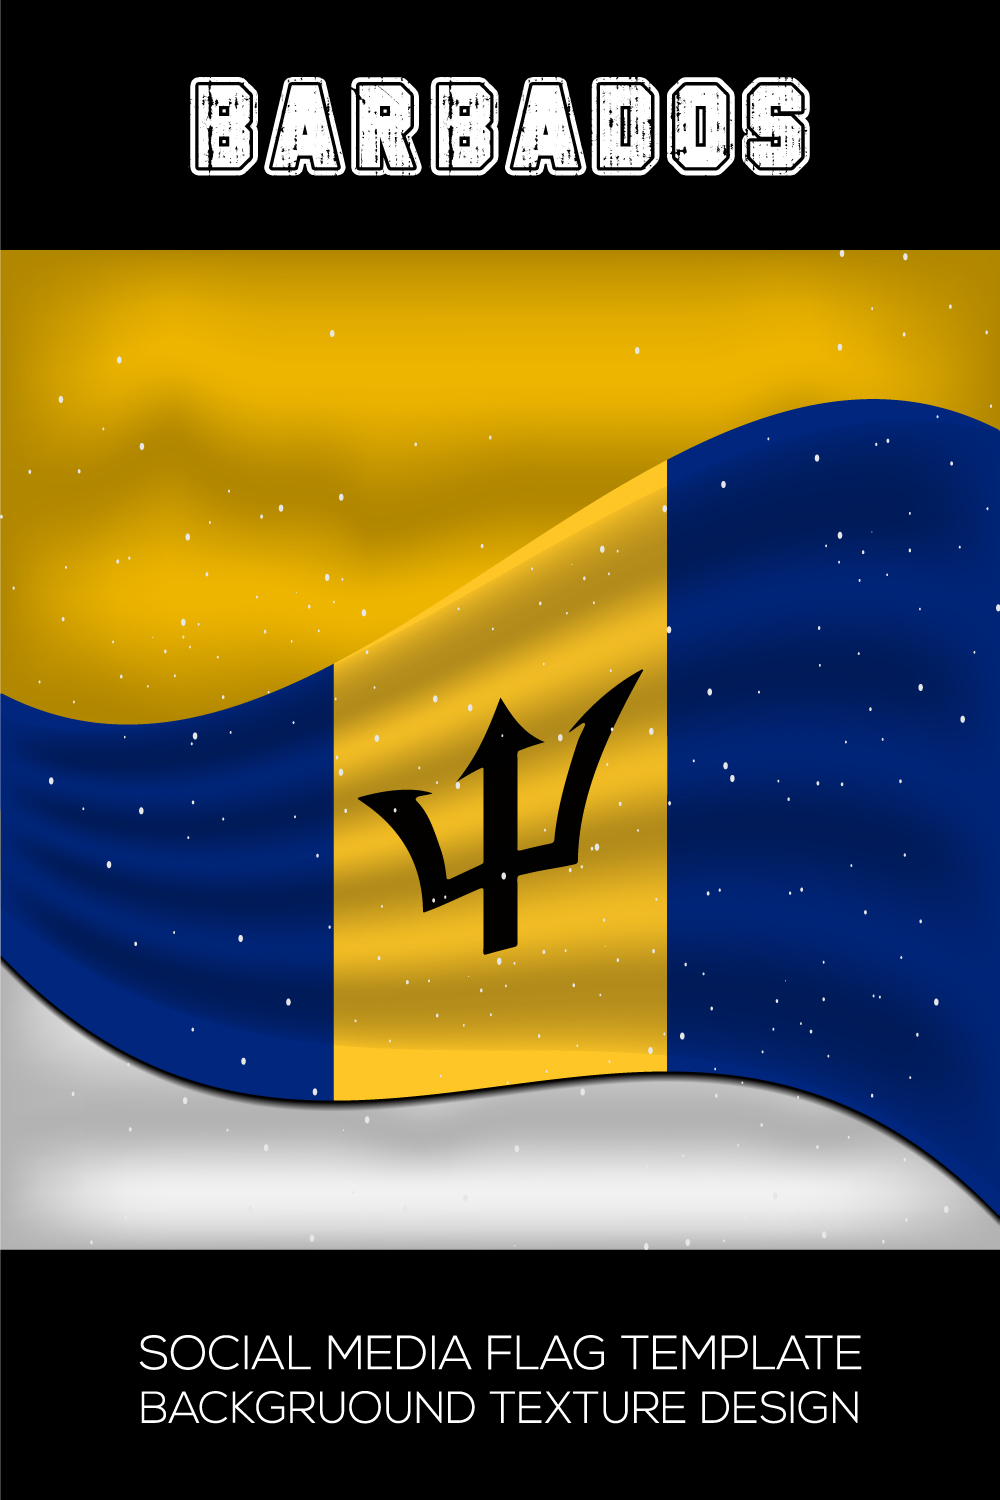 Amazing image of the flag of Barbados.